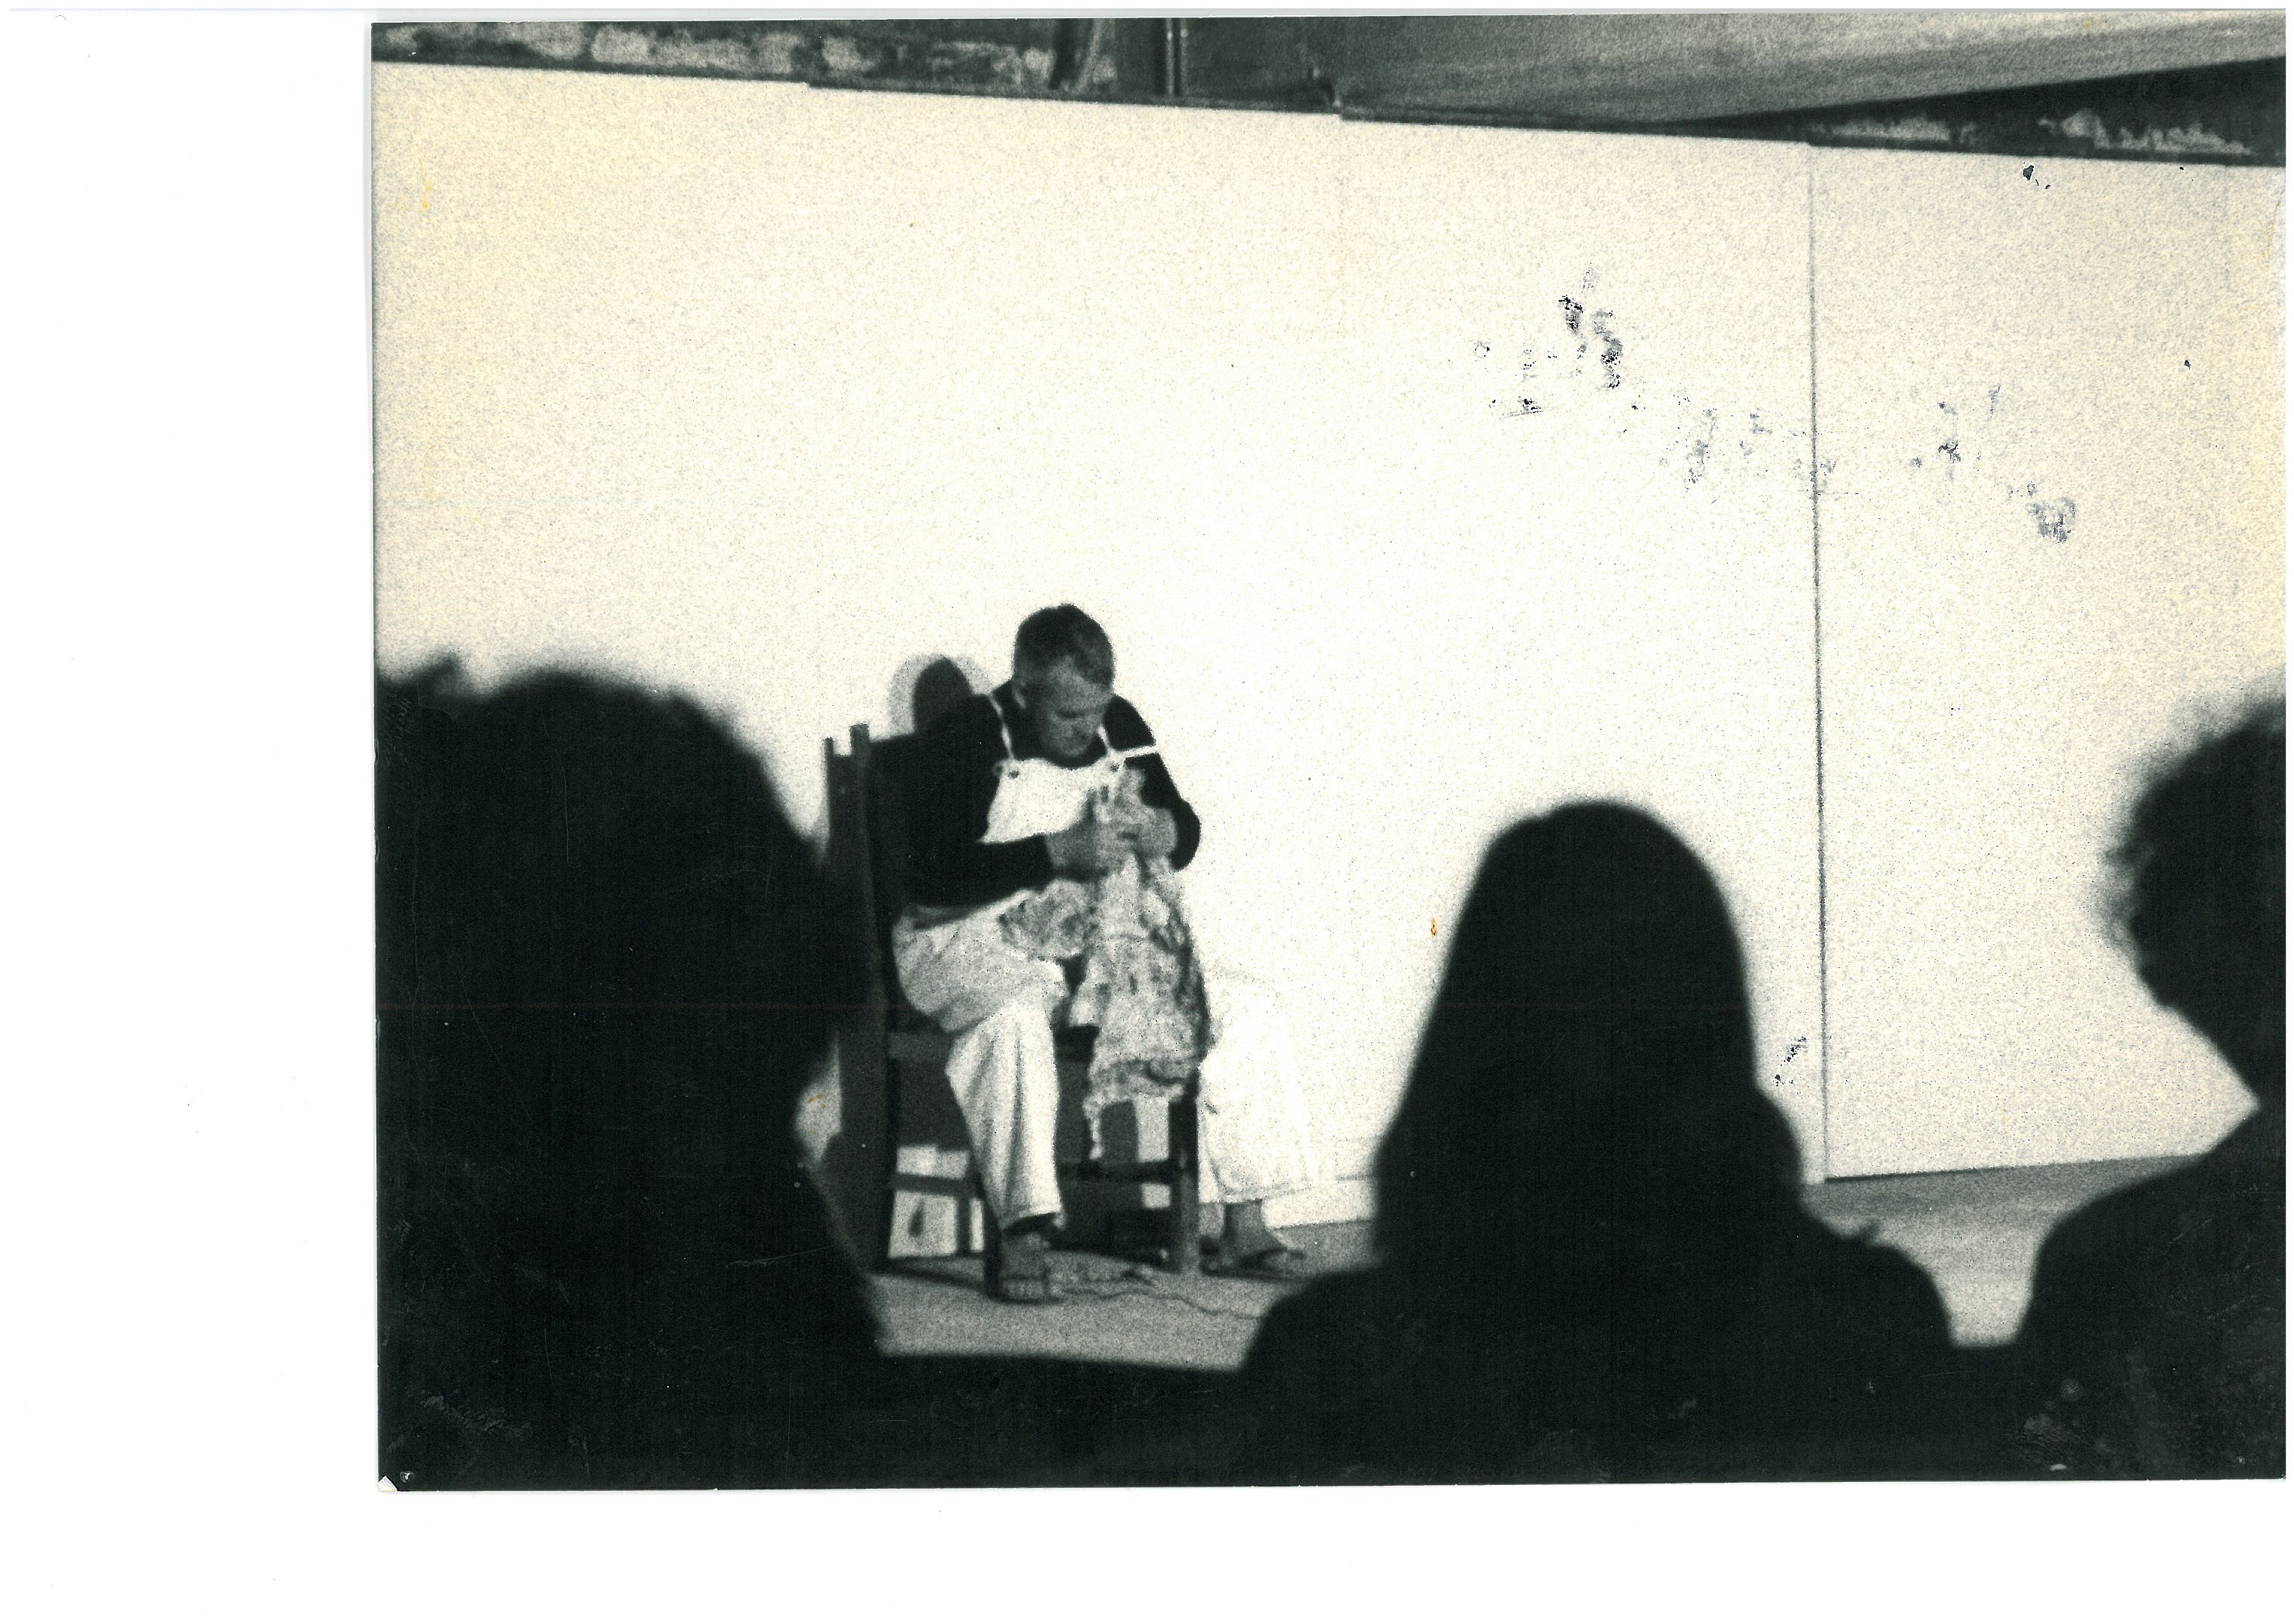 <p>Unknown photographer,&nbsp;<em>Jim Allen,&nbsp;Newspaper Piece, Experimental Art Foundation, Adelaide</em>, 1976, black and white photograph on paper, transferred to digital file, original in Jim Allen Archive, E H McCormick Research Library, Auckland Art Gallery Toi o Tāmaki, gift of Jim Allen, 2012</p>